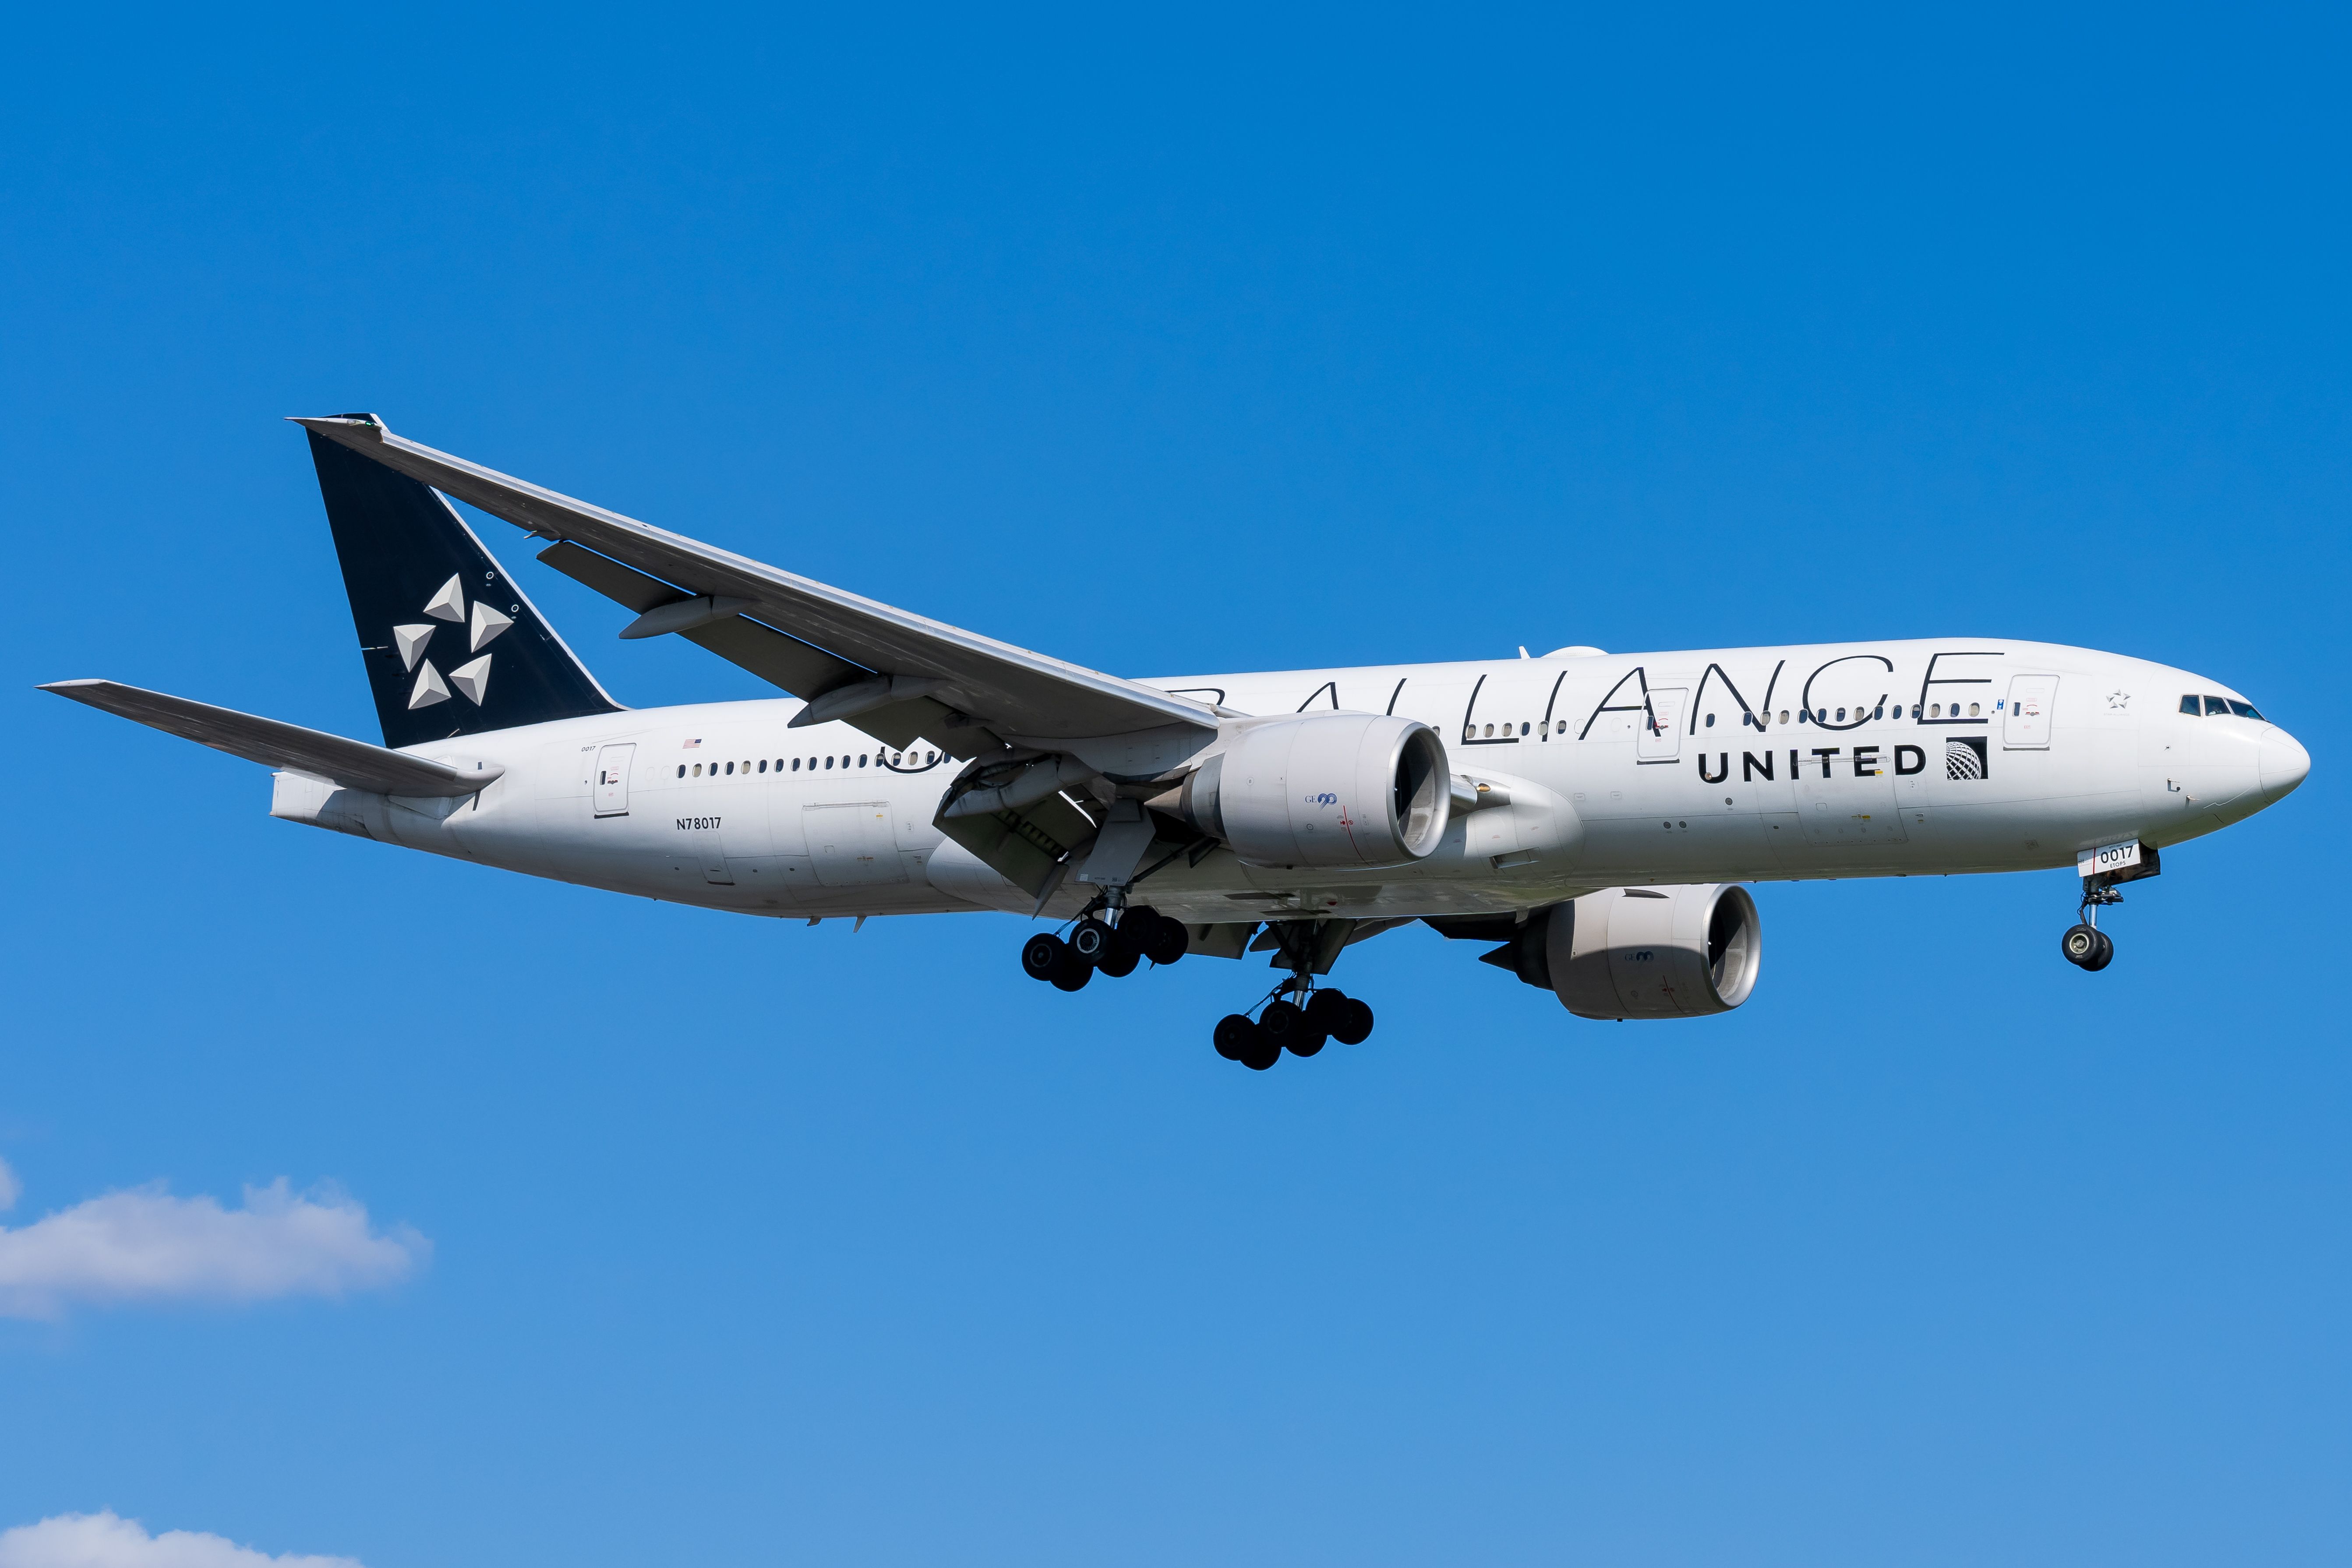 A United Airlines Beoing 777 in Star Alliance livery on final approach.